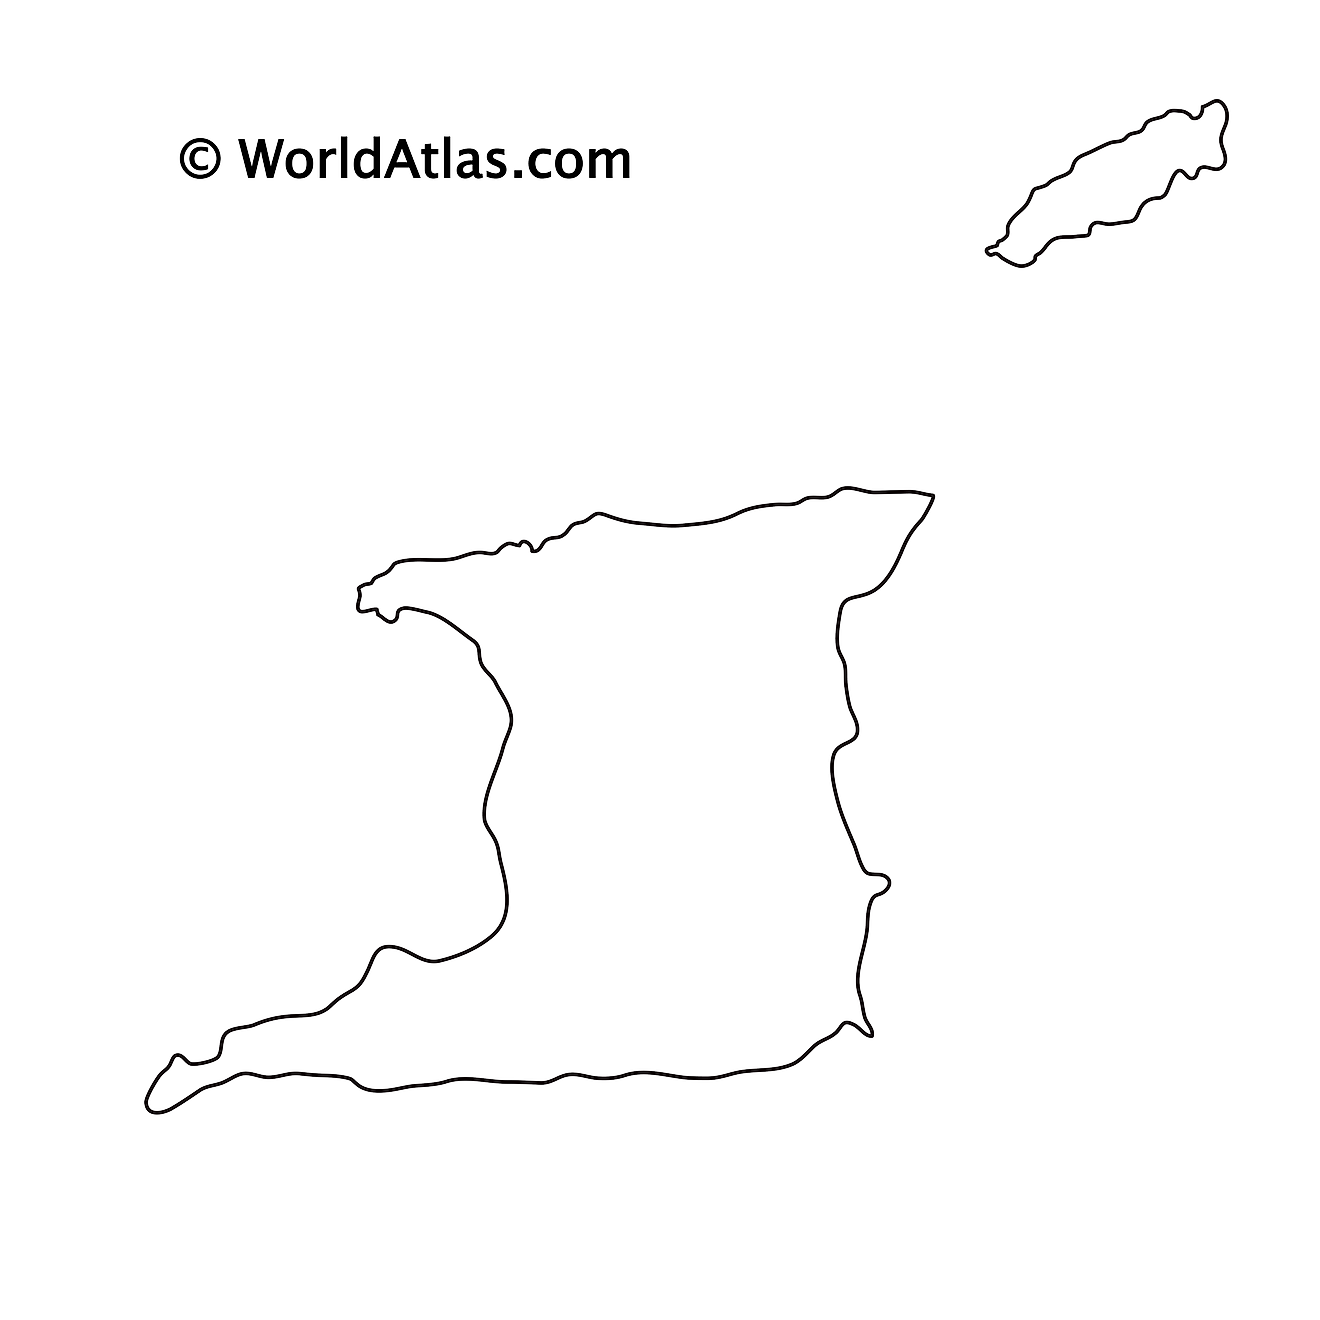 Blank Outline Map of Trinidad and Tobago